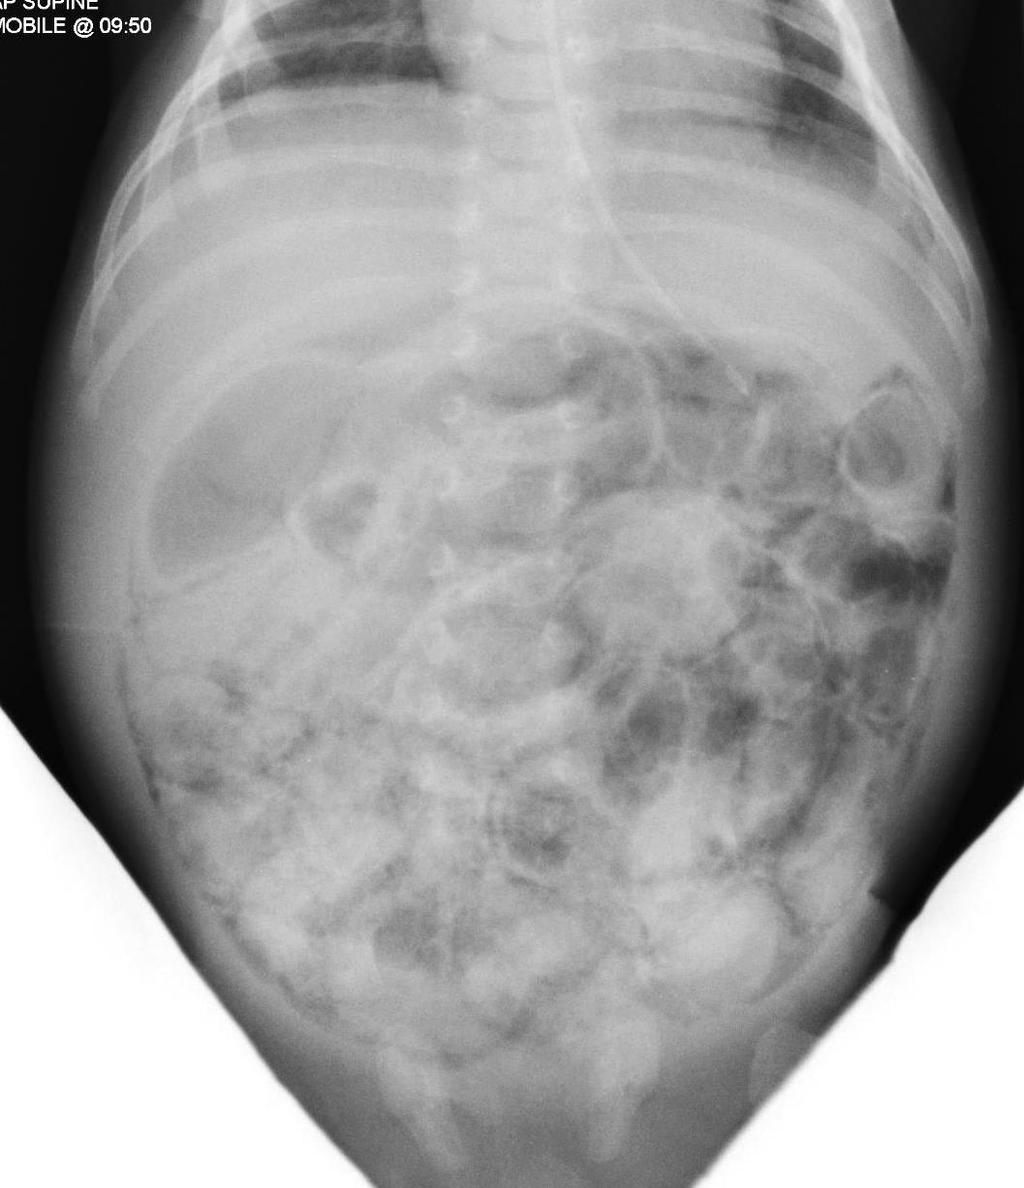 Intramural gas in gastroschisis (pneumatosis intestinalis - PI) Seen in 6 babies at the time that they